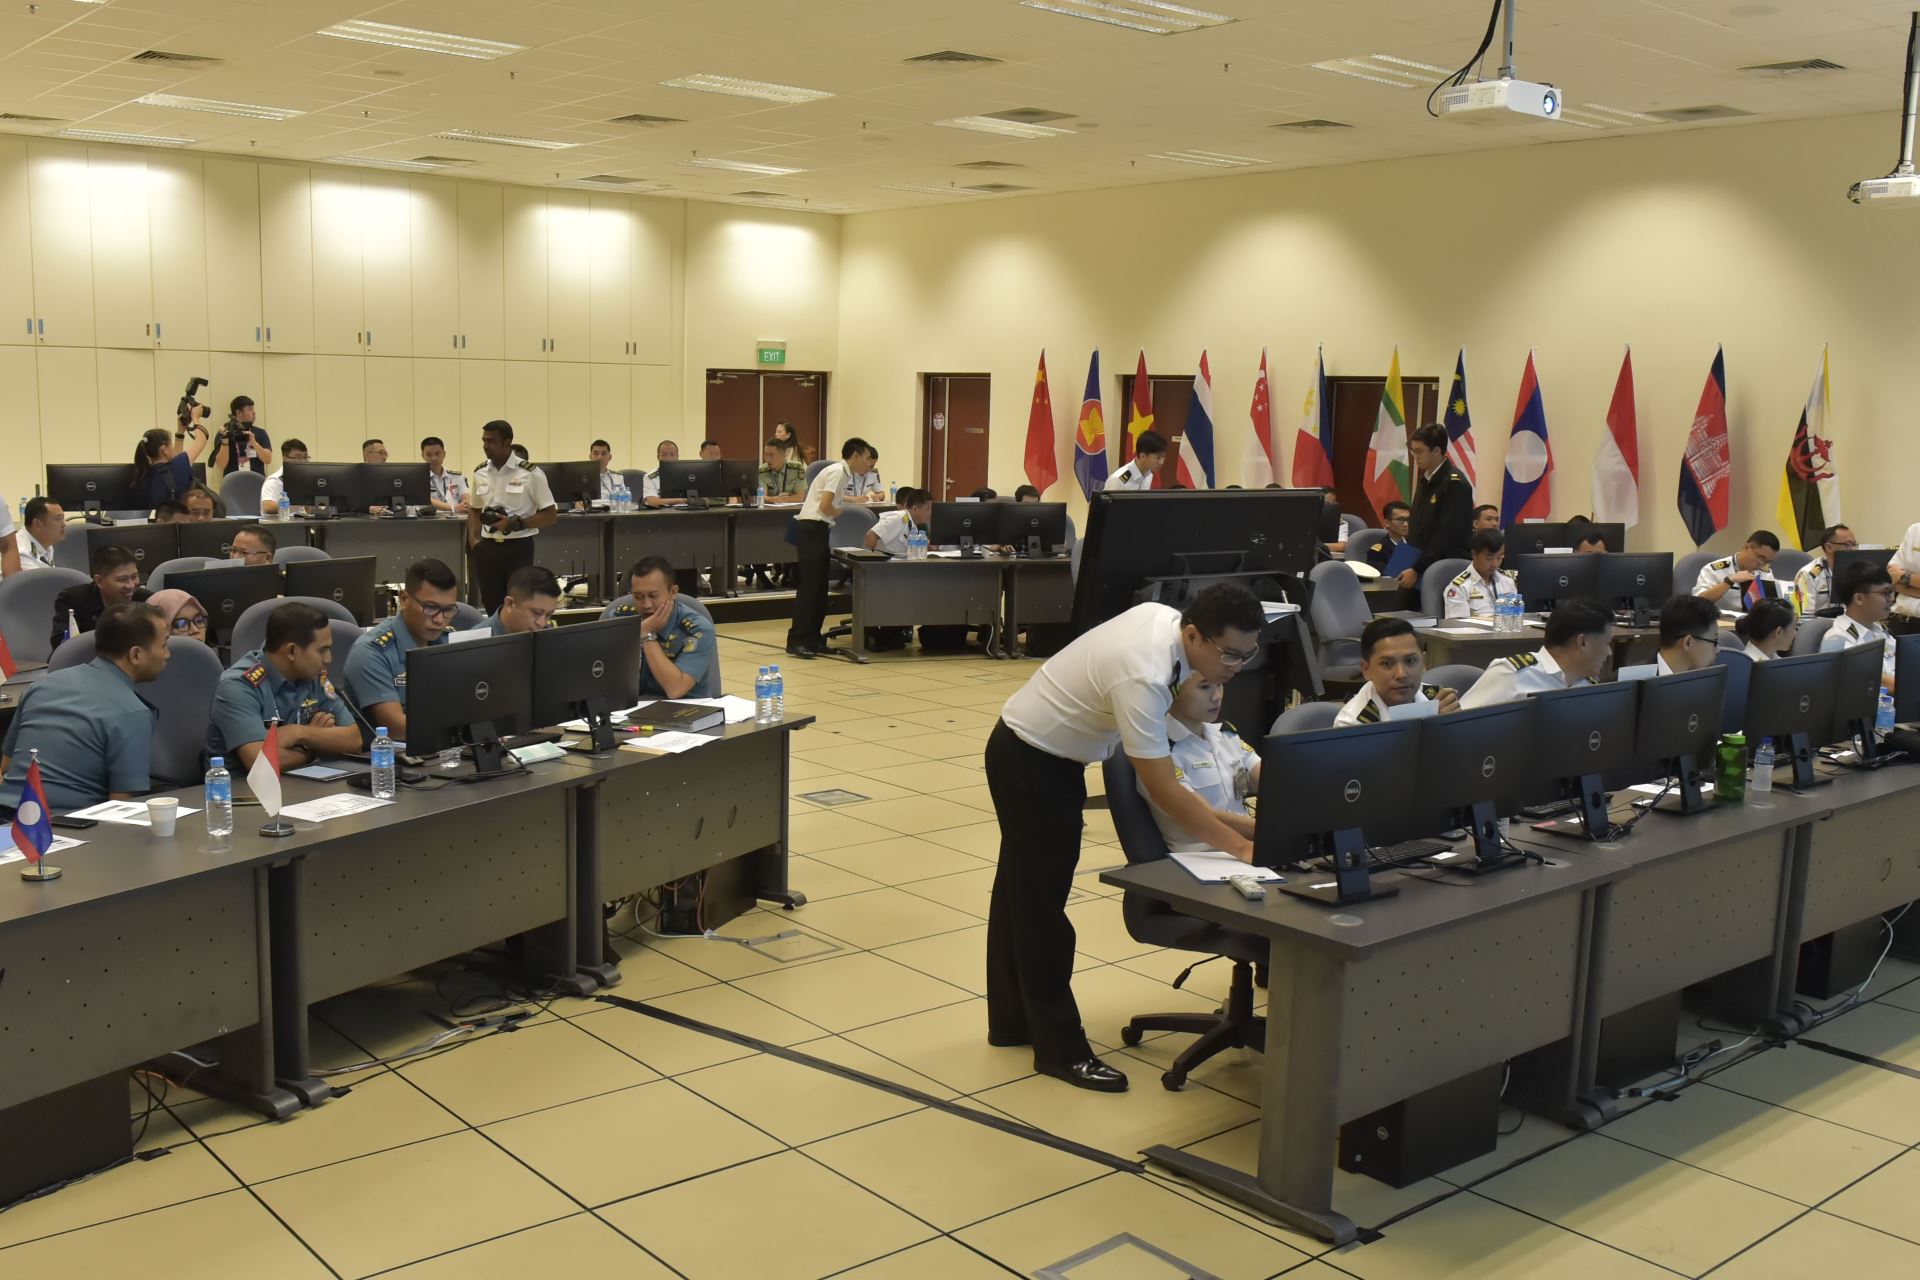 ASEAN and People's Liberation Army (Navy) exercise participants at the MOEC watch floor.